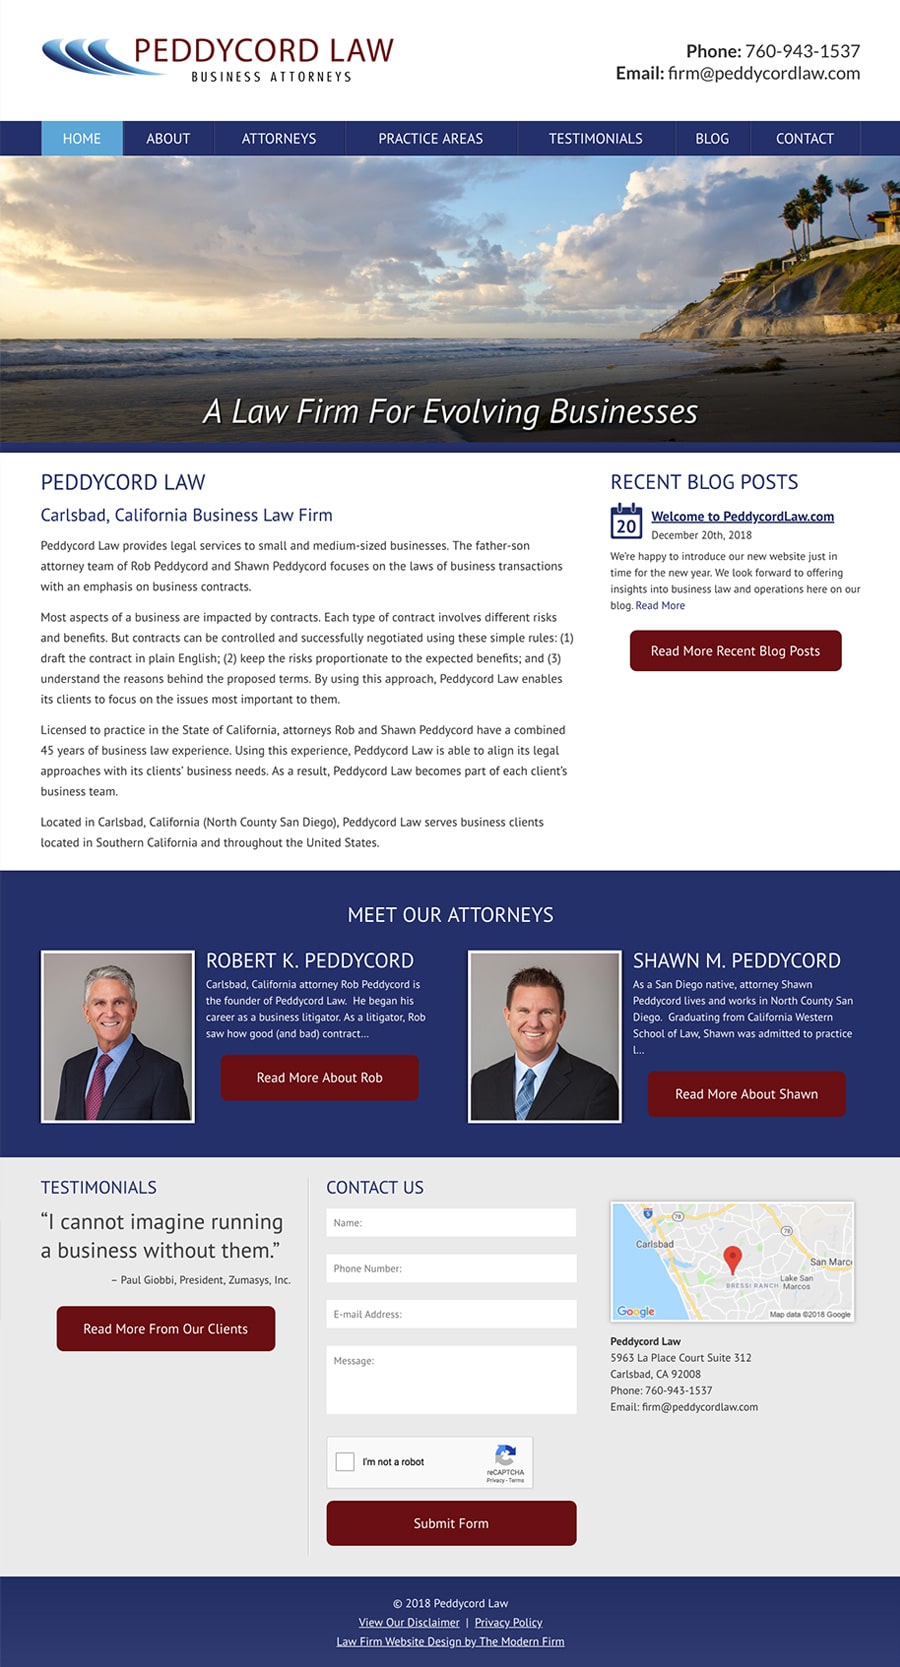 Law Firm Website Design for Peddycord Law